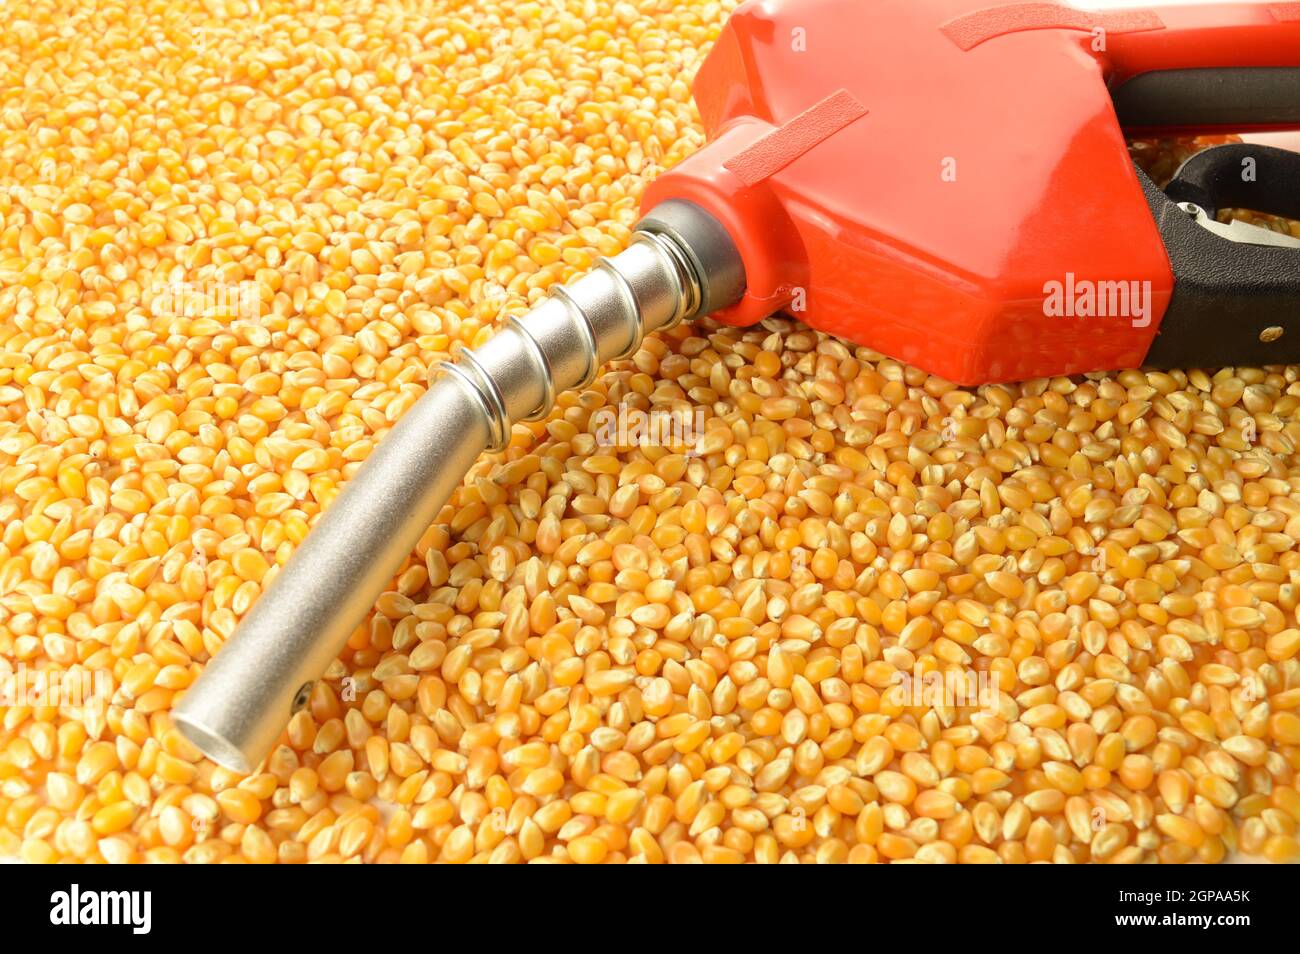 A red gas pump nozzle and handle on a pile of whole kernel corn to represent biofuel concepts. Stock Photo